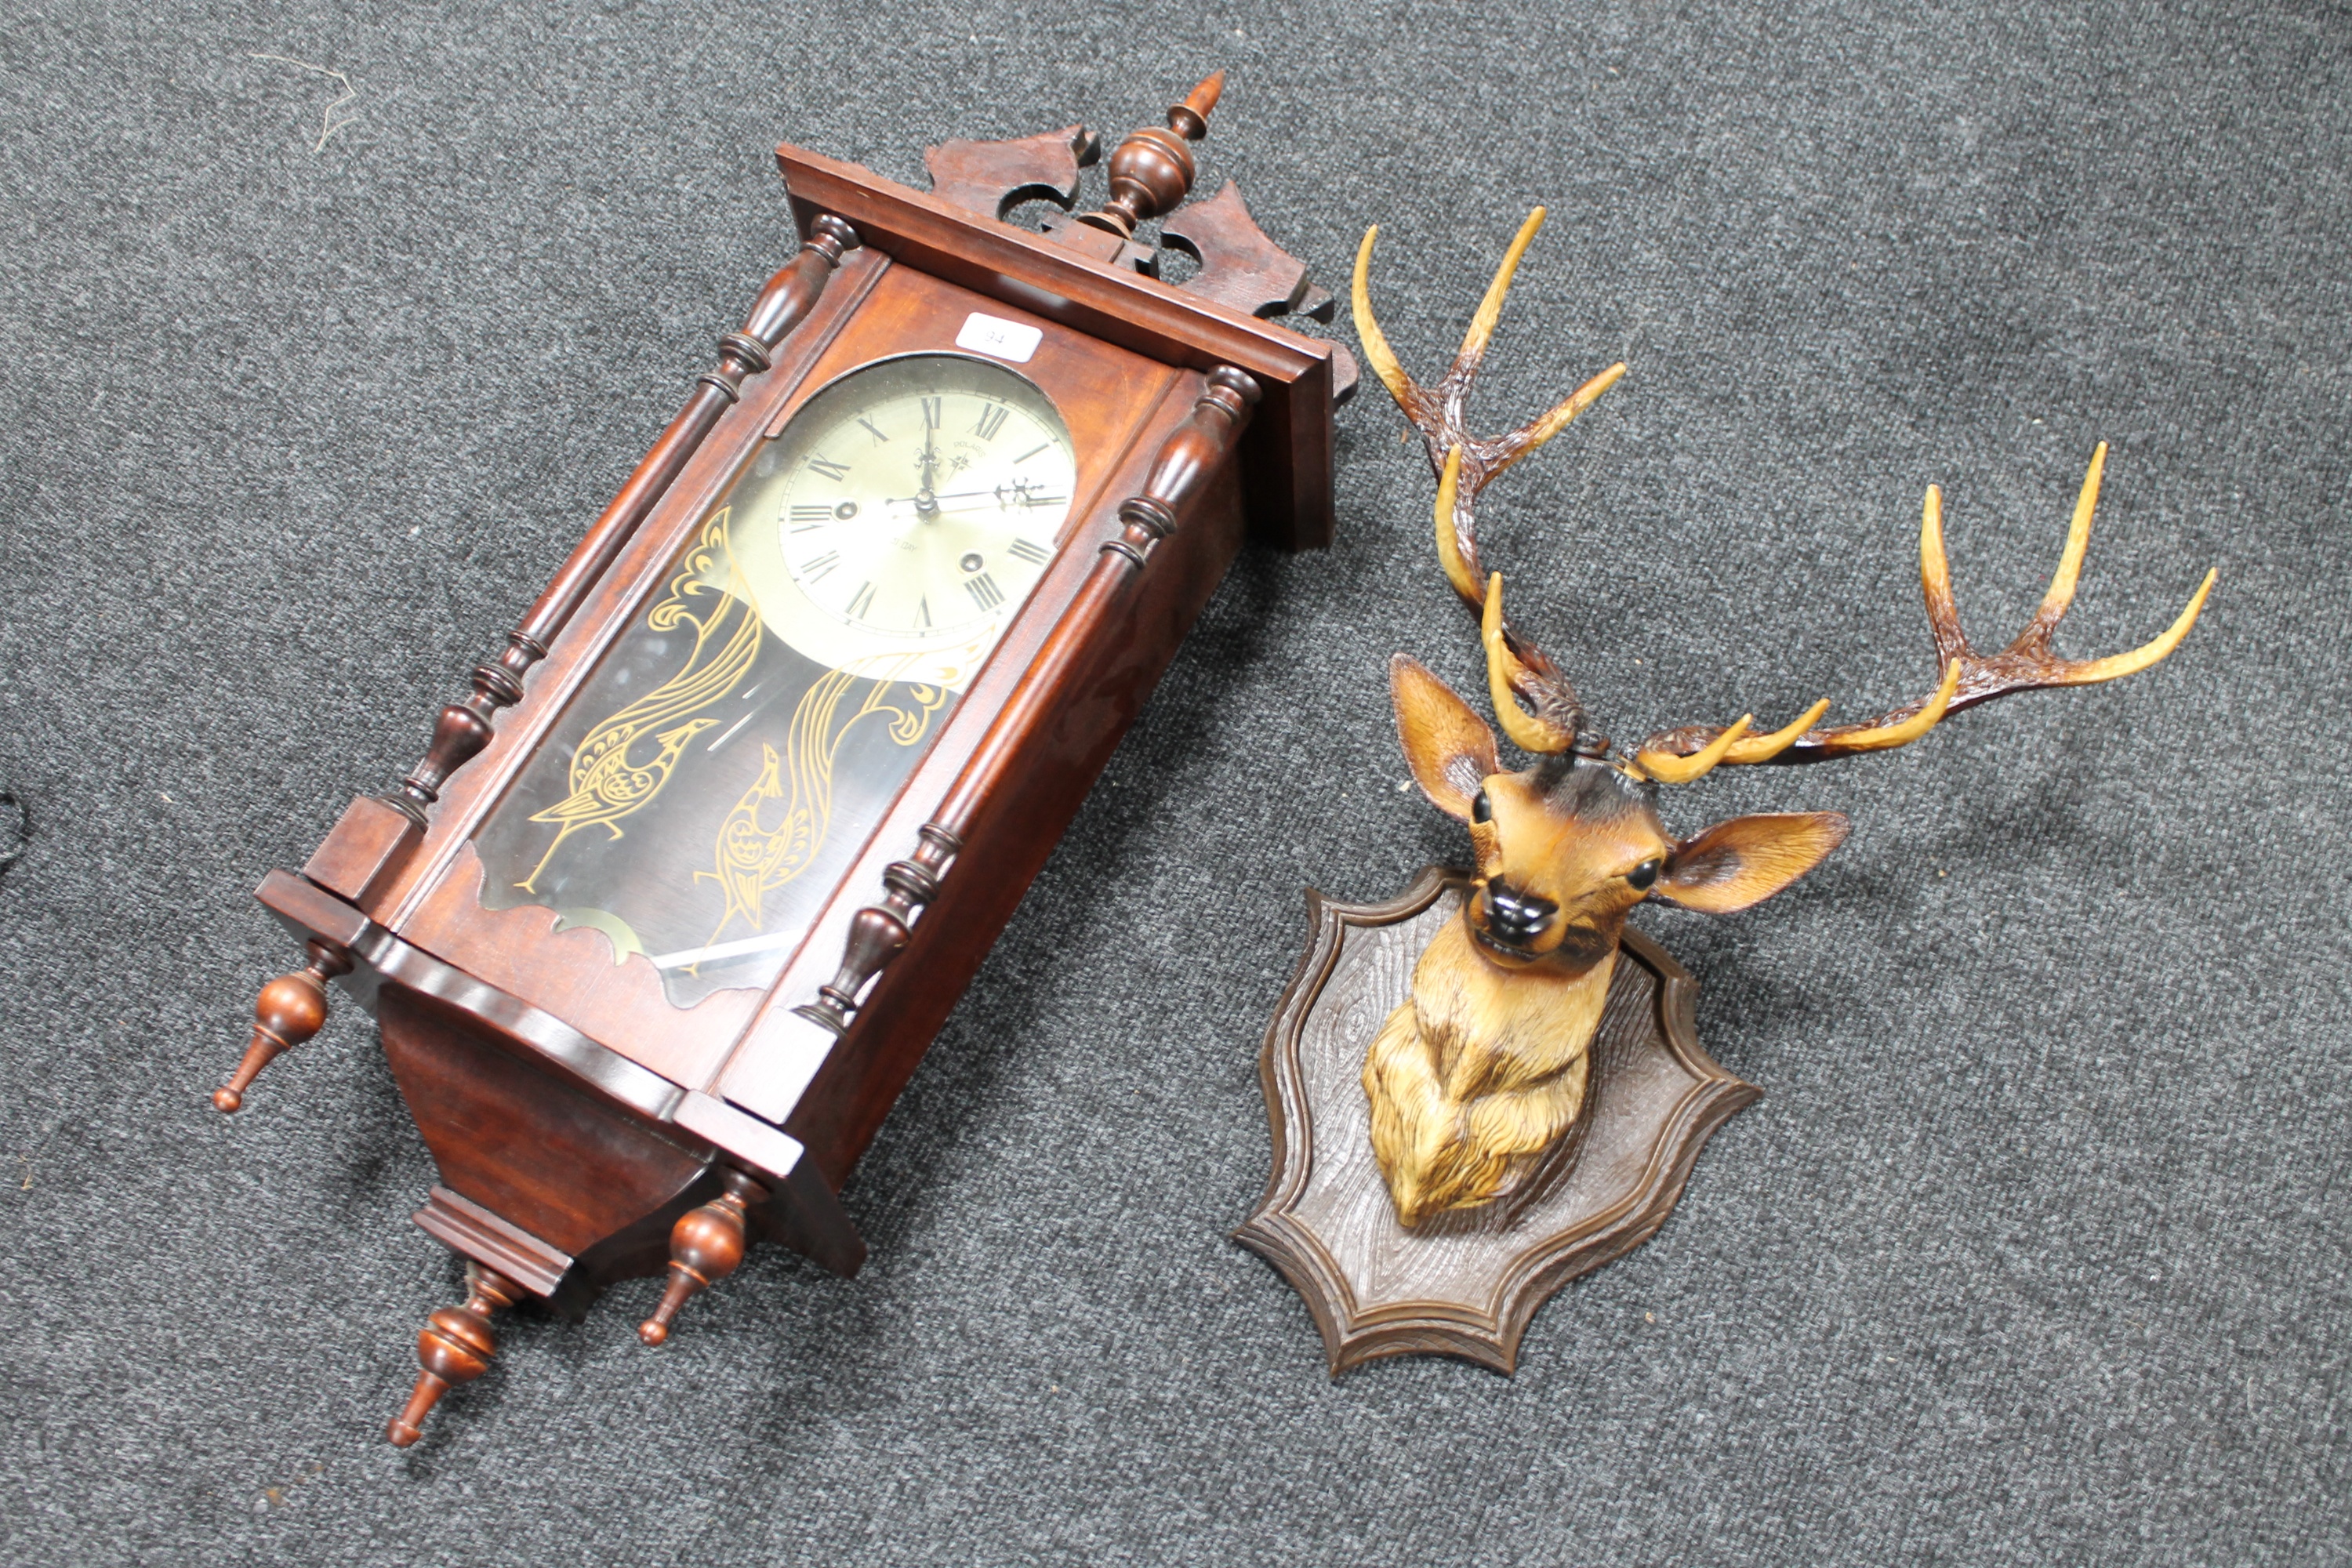 A Polaris 31 day wall clock and a plastic deer's head